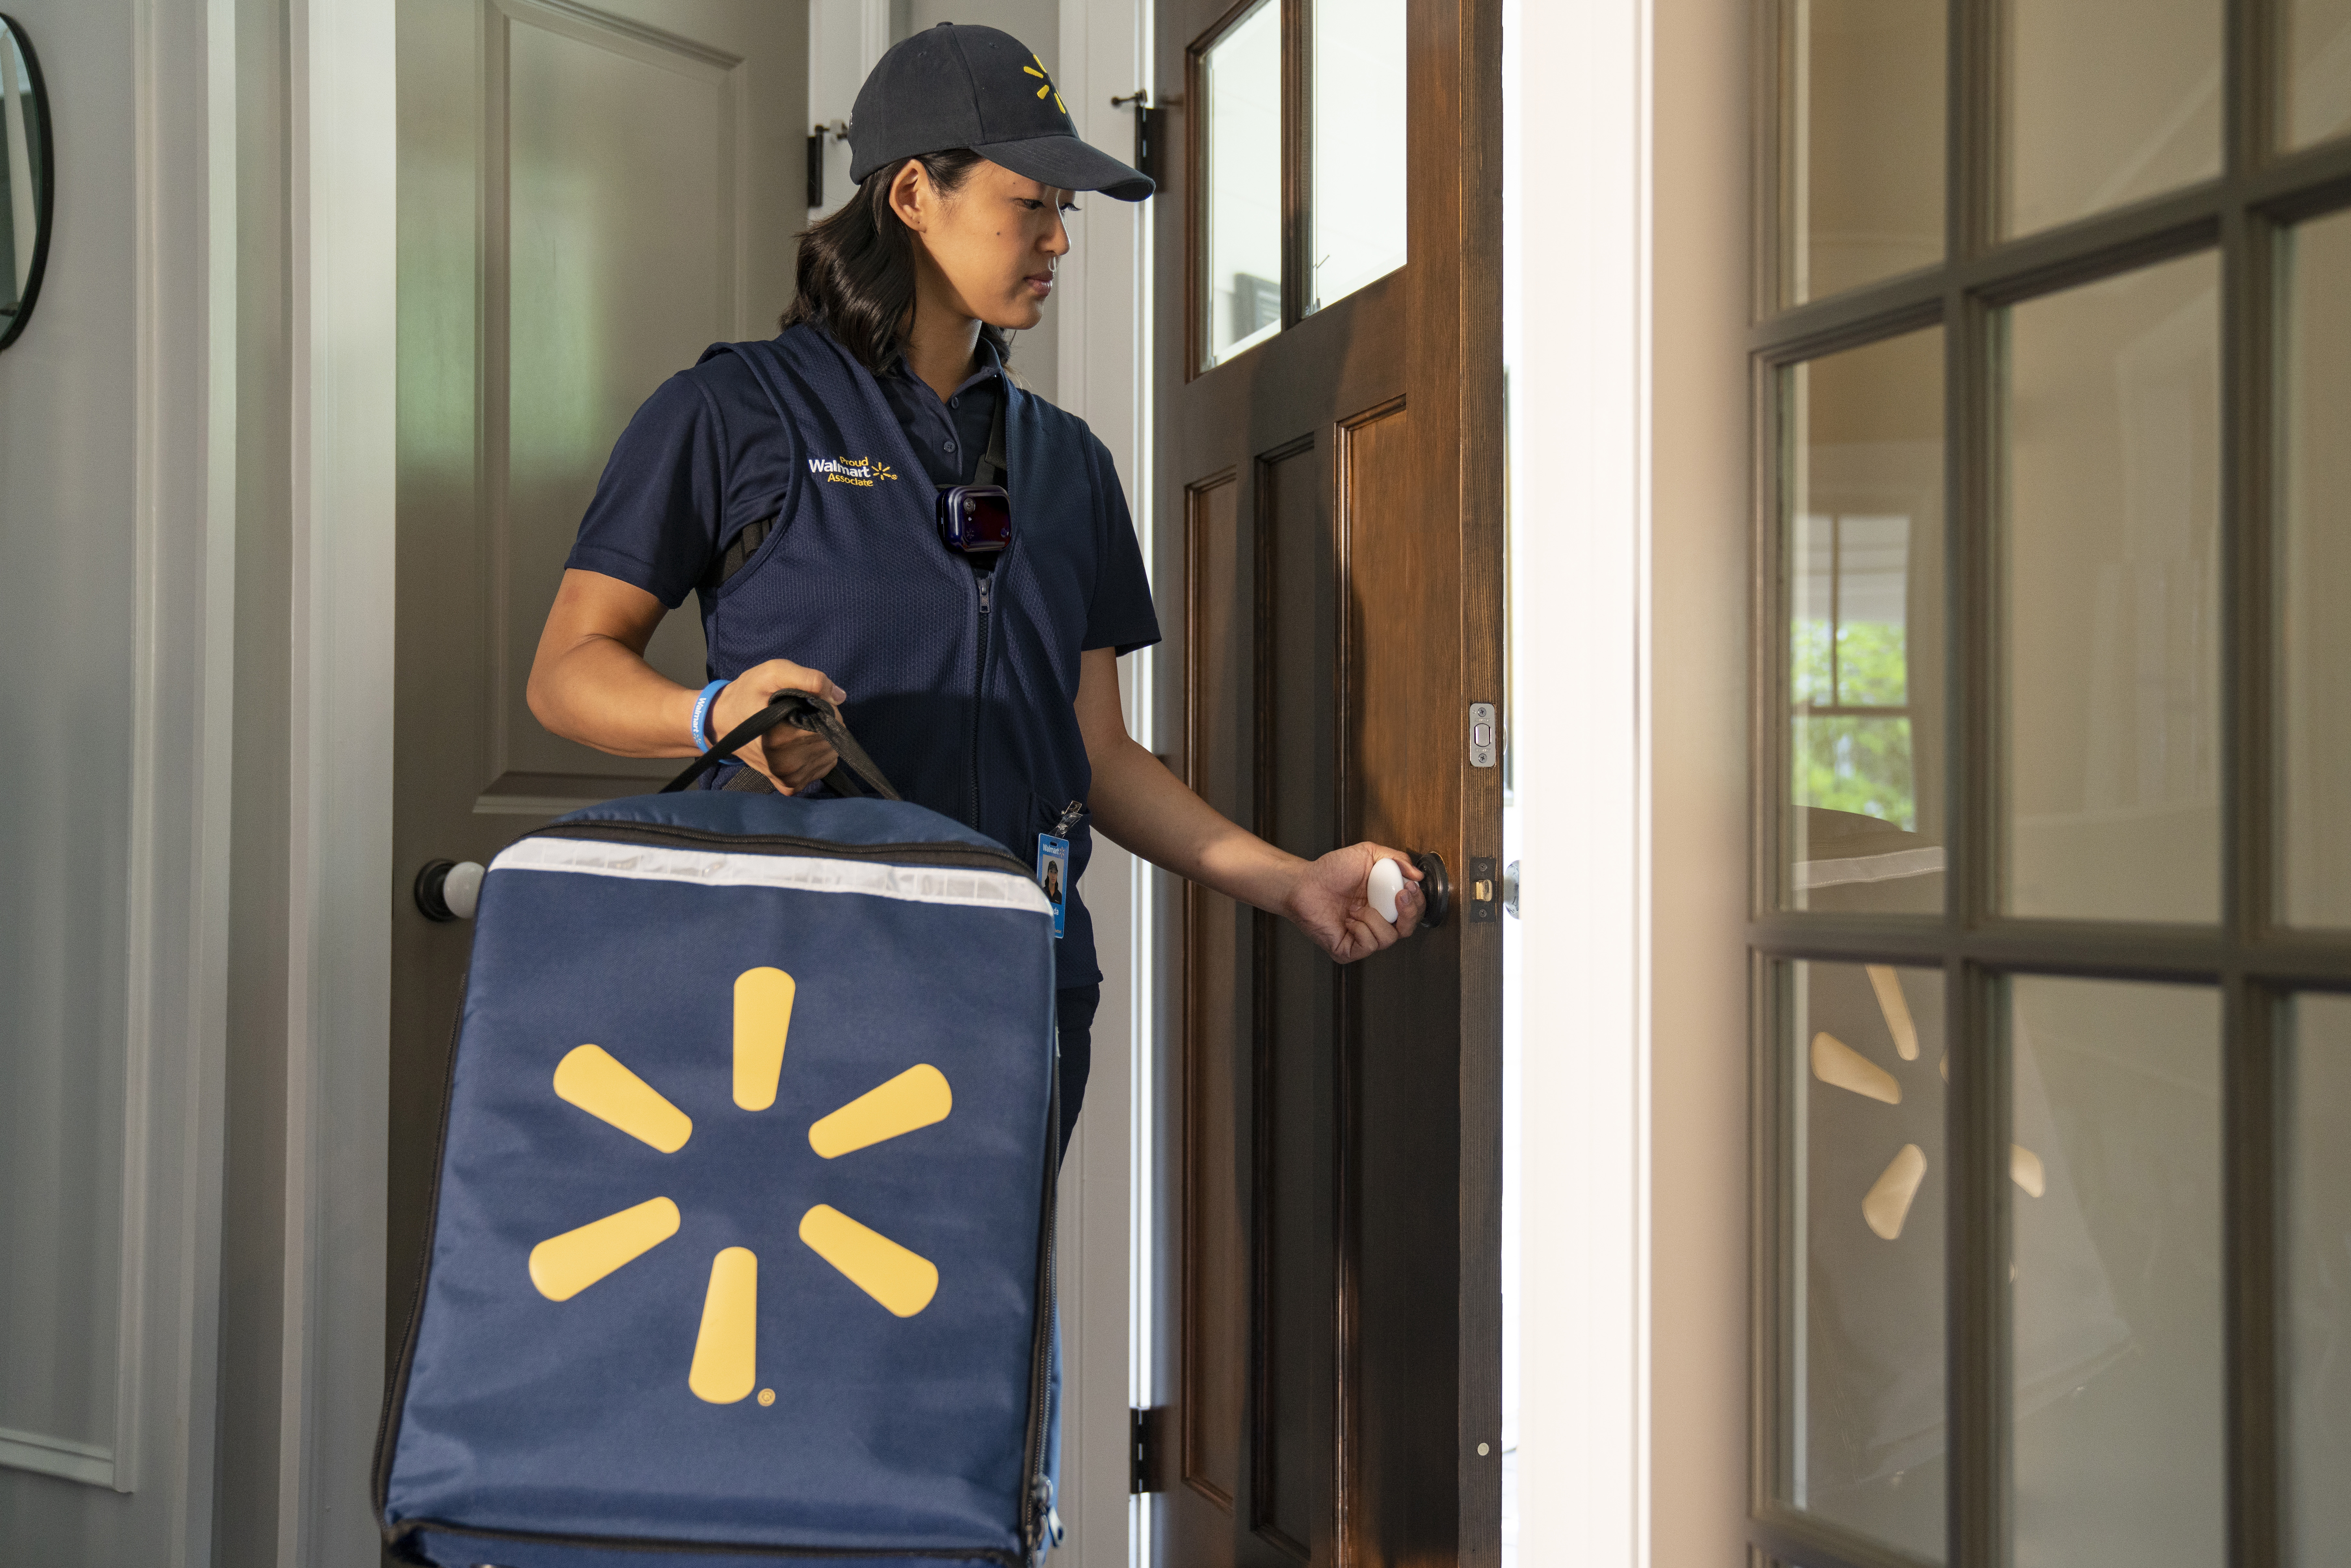 Walmart CAP 2 Position (Meaning, Duties, Pay + More)